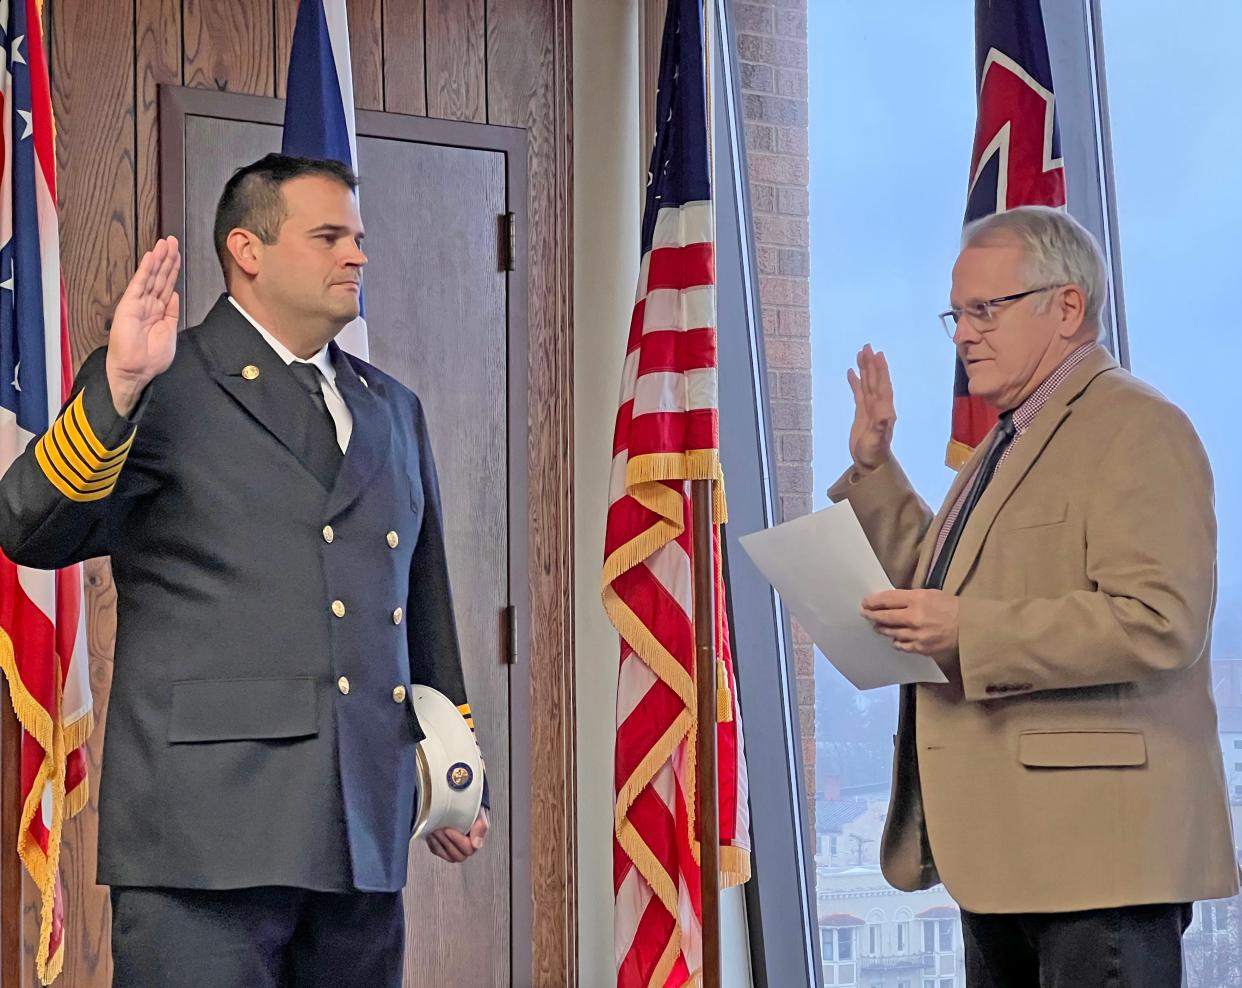 Mansfield Mayor Tim Theaker swears in the new Mansfield Fire Department Chief Dan Crow on Friday afternoon.